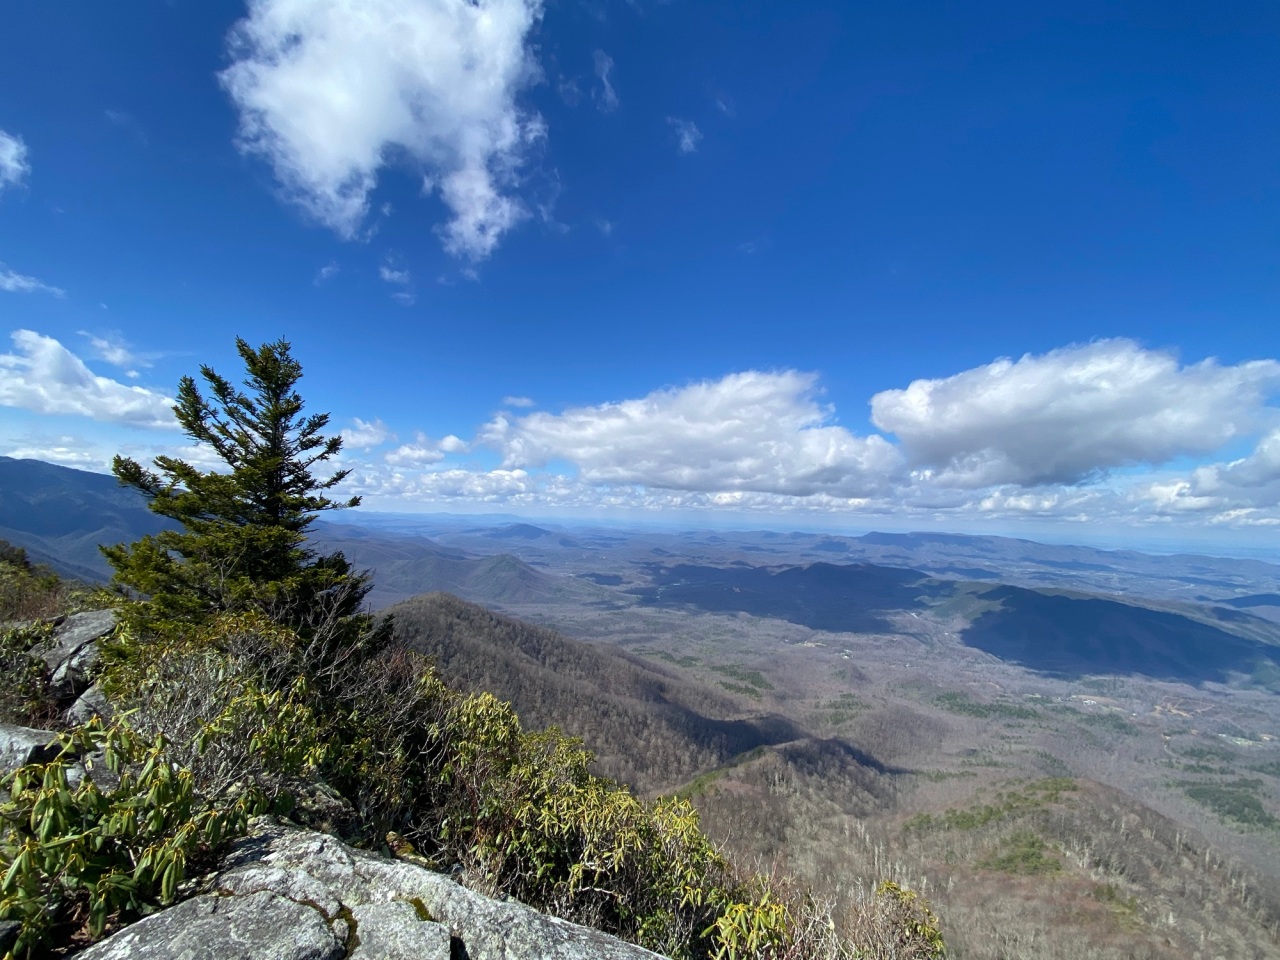 Mount Cammerer – Great Smoky Mountains National Park